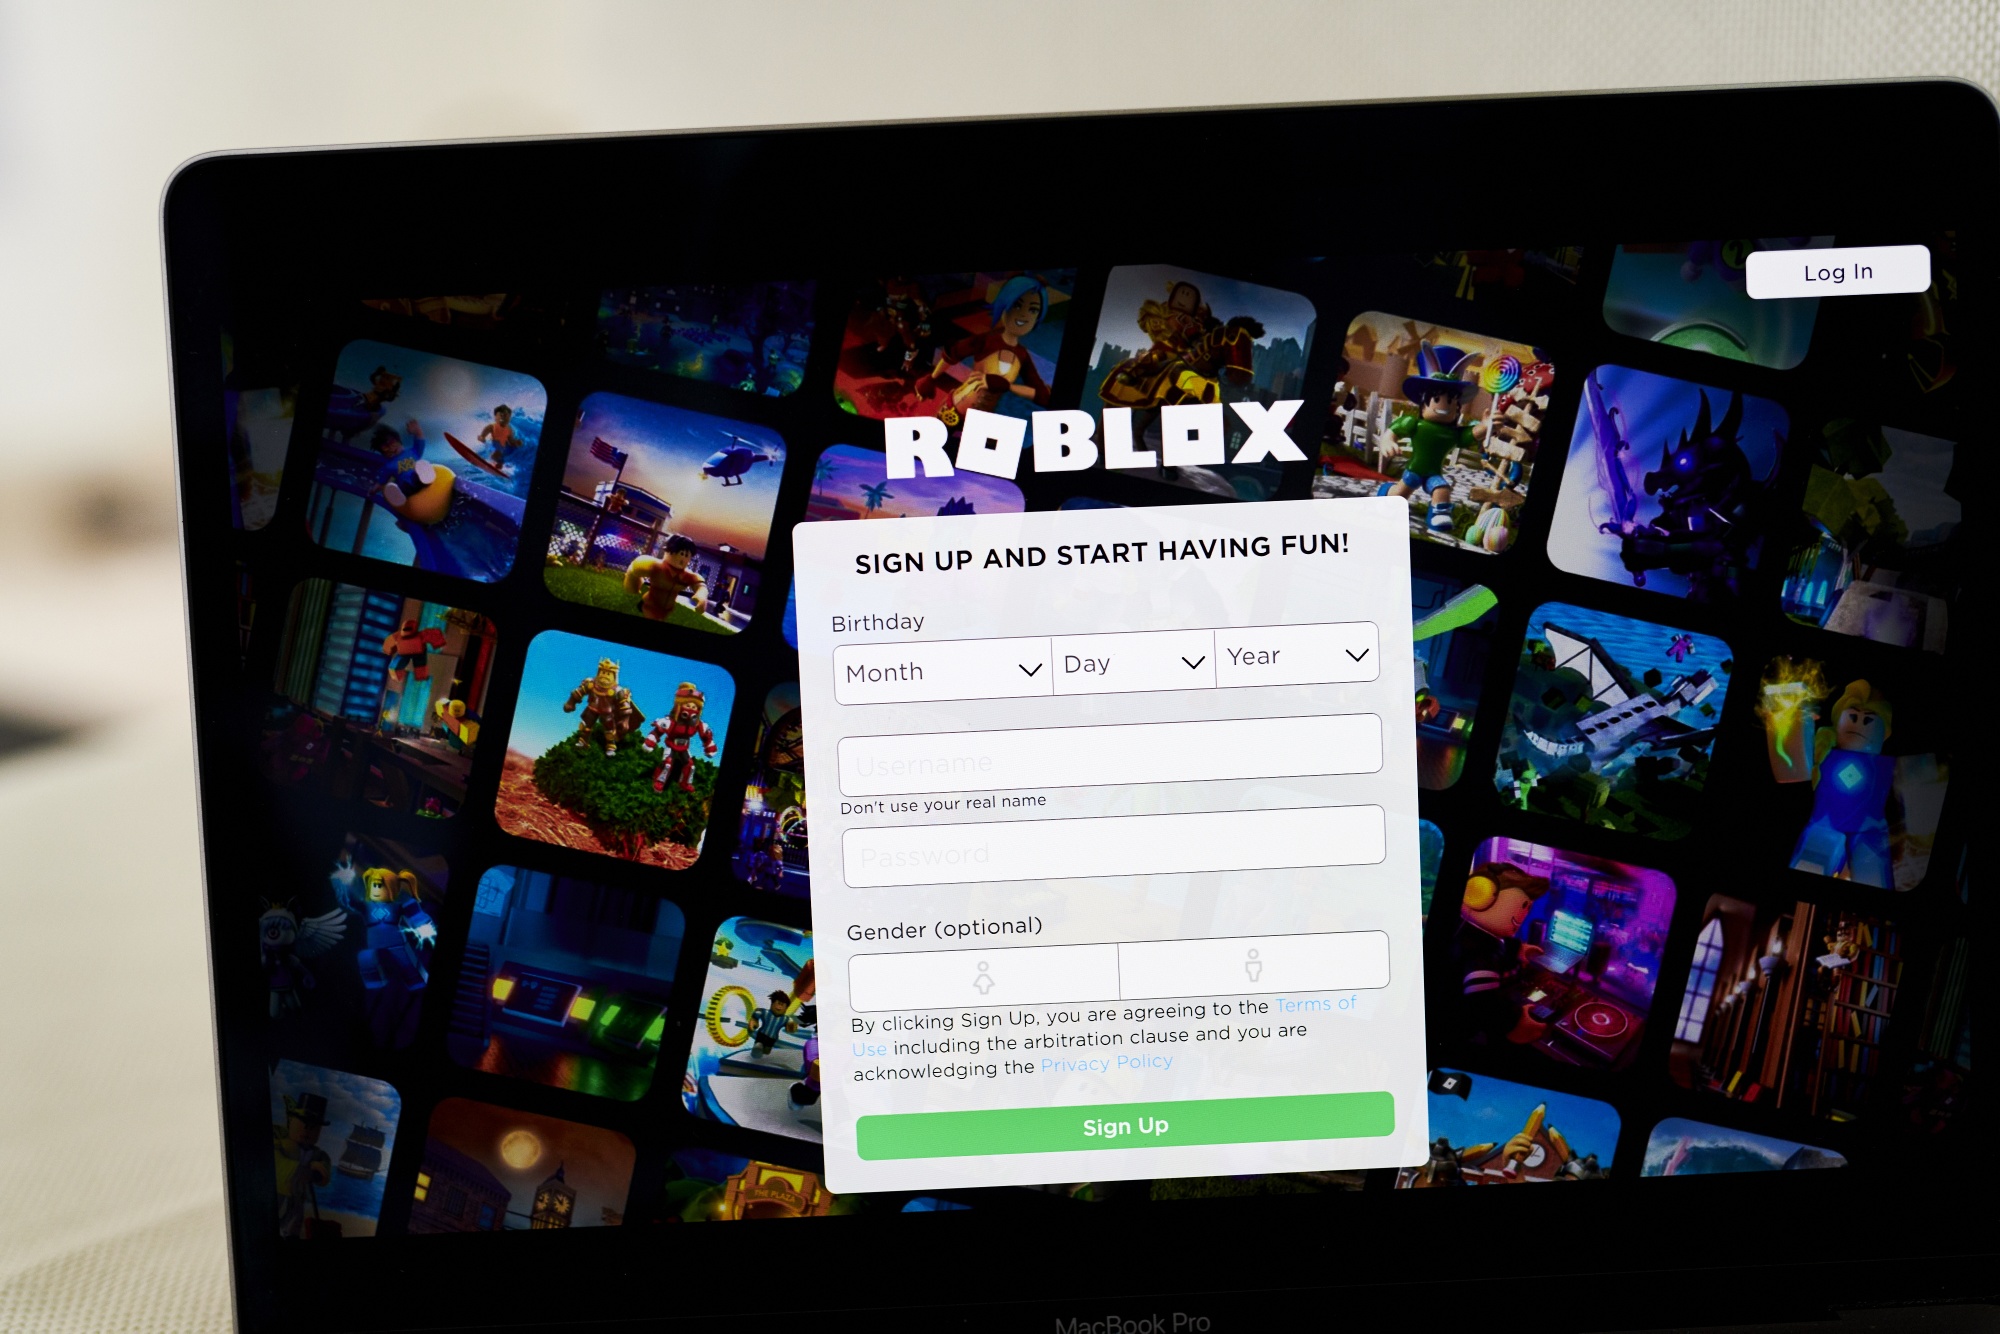 Roblox (NYSE:RBLX): Big-Time Bookings Growth Gets This Stock Cooking